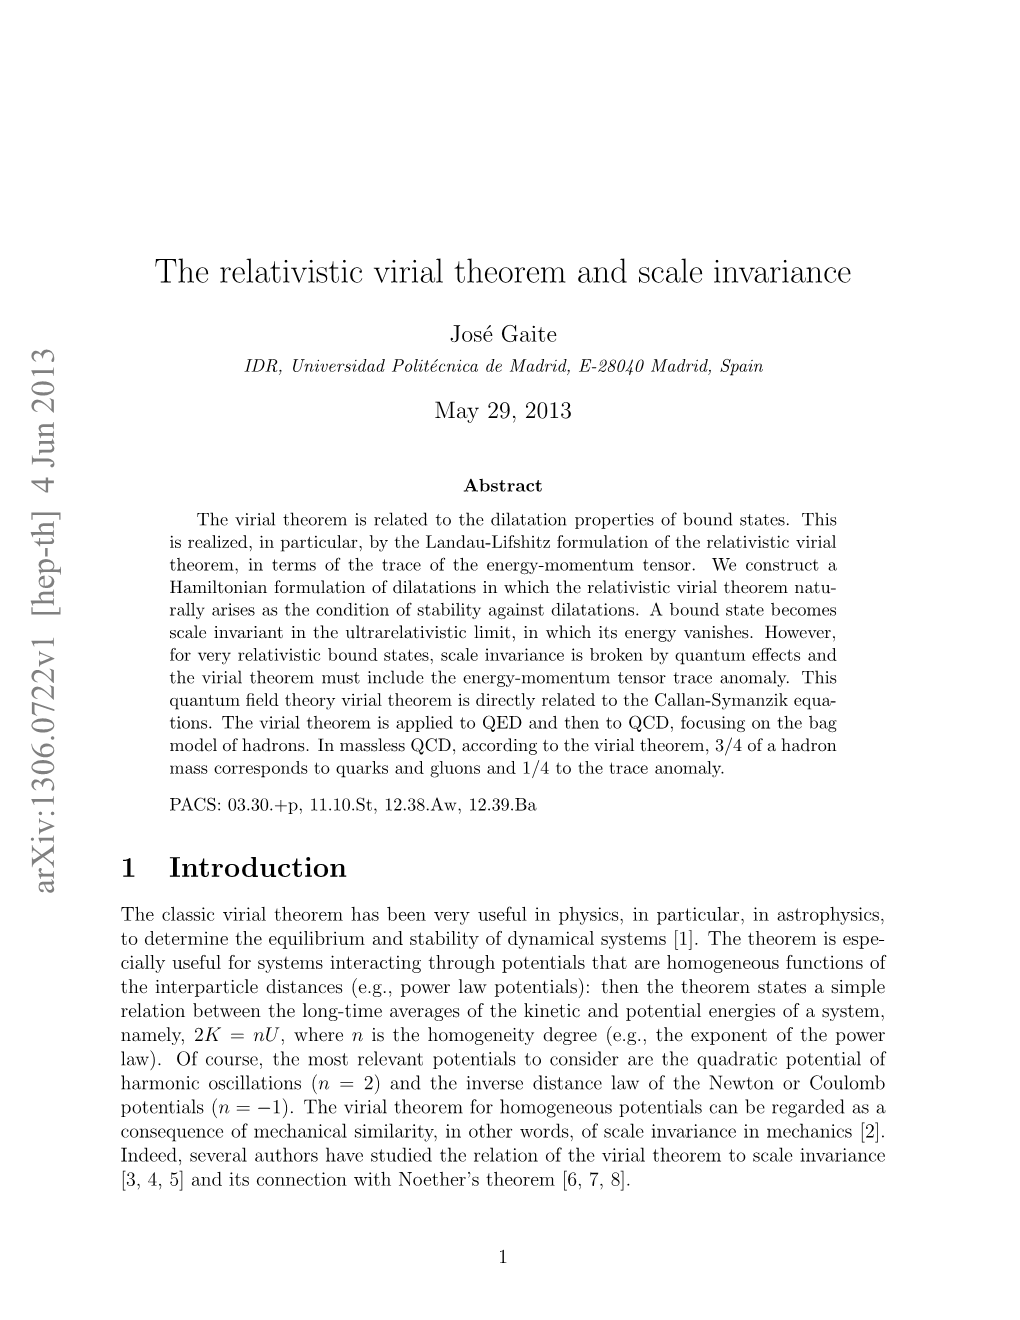 The Relativistic Virial Theorem and Scale Invariance